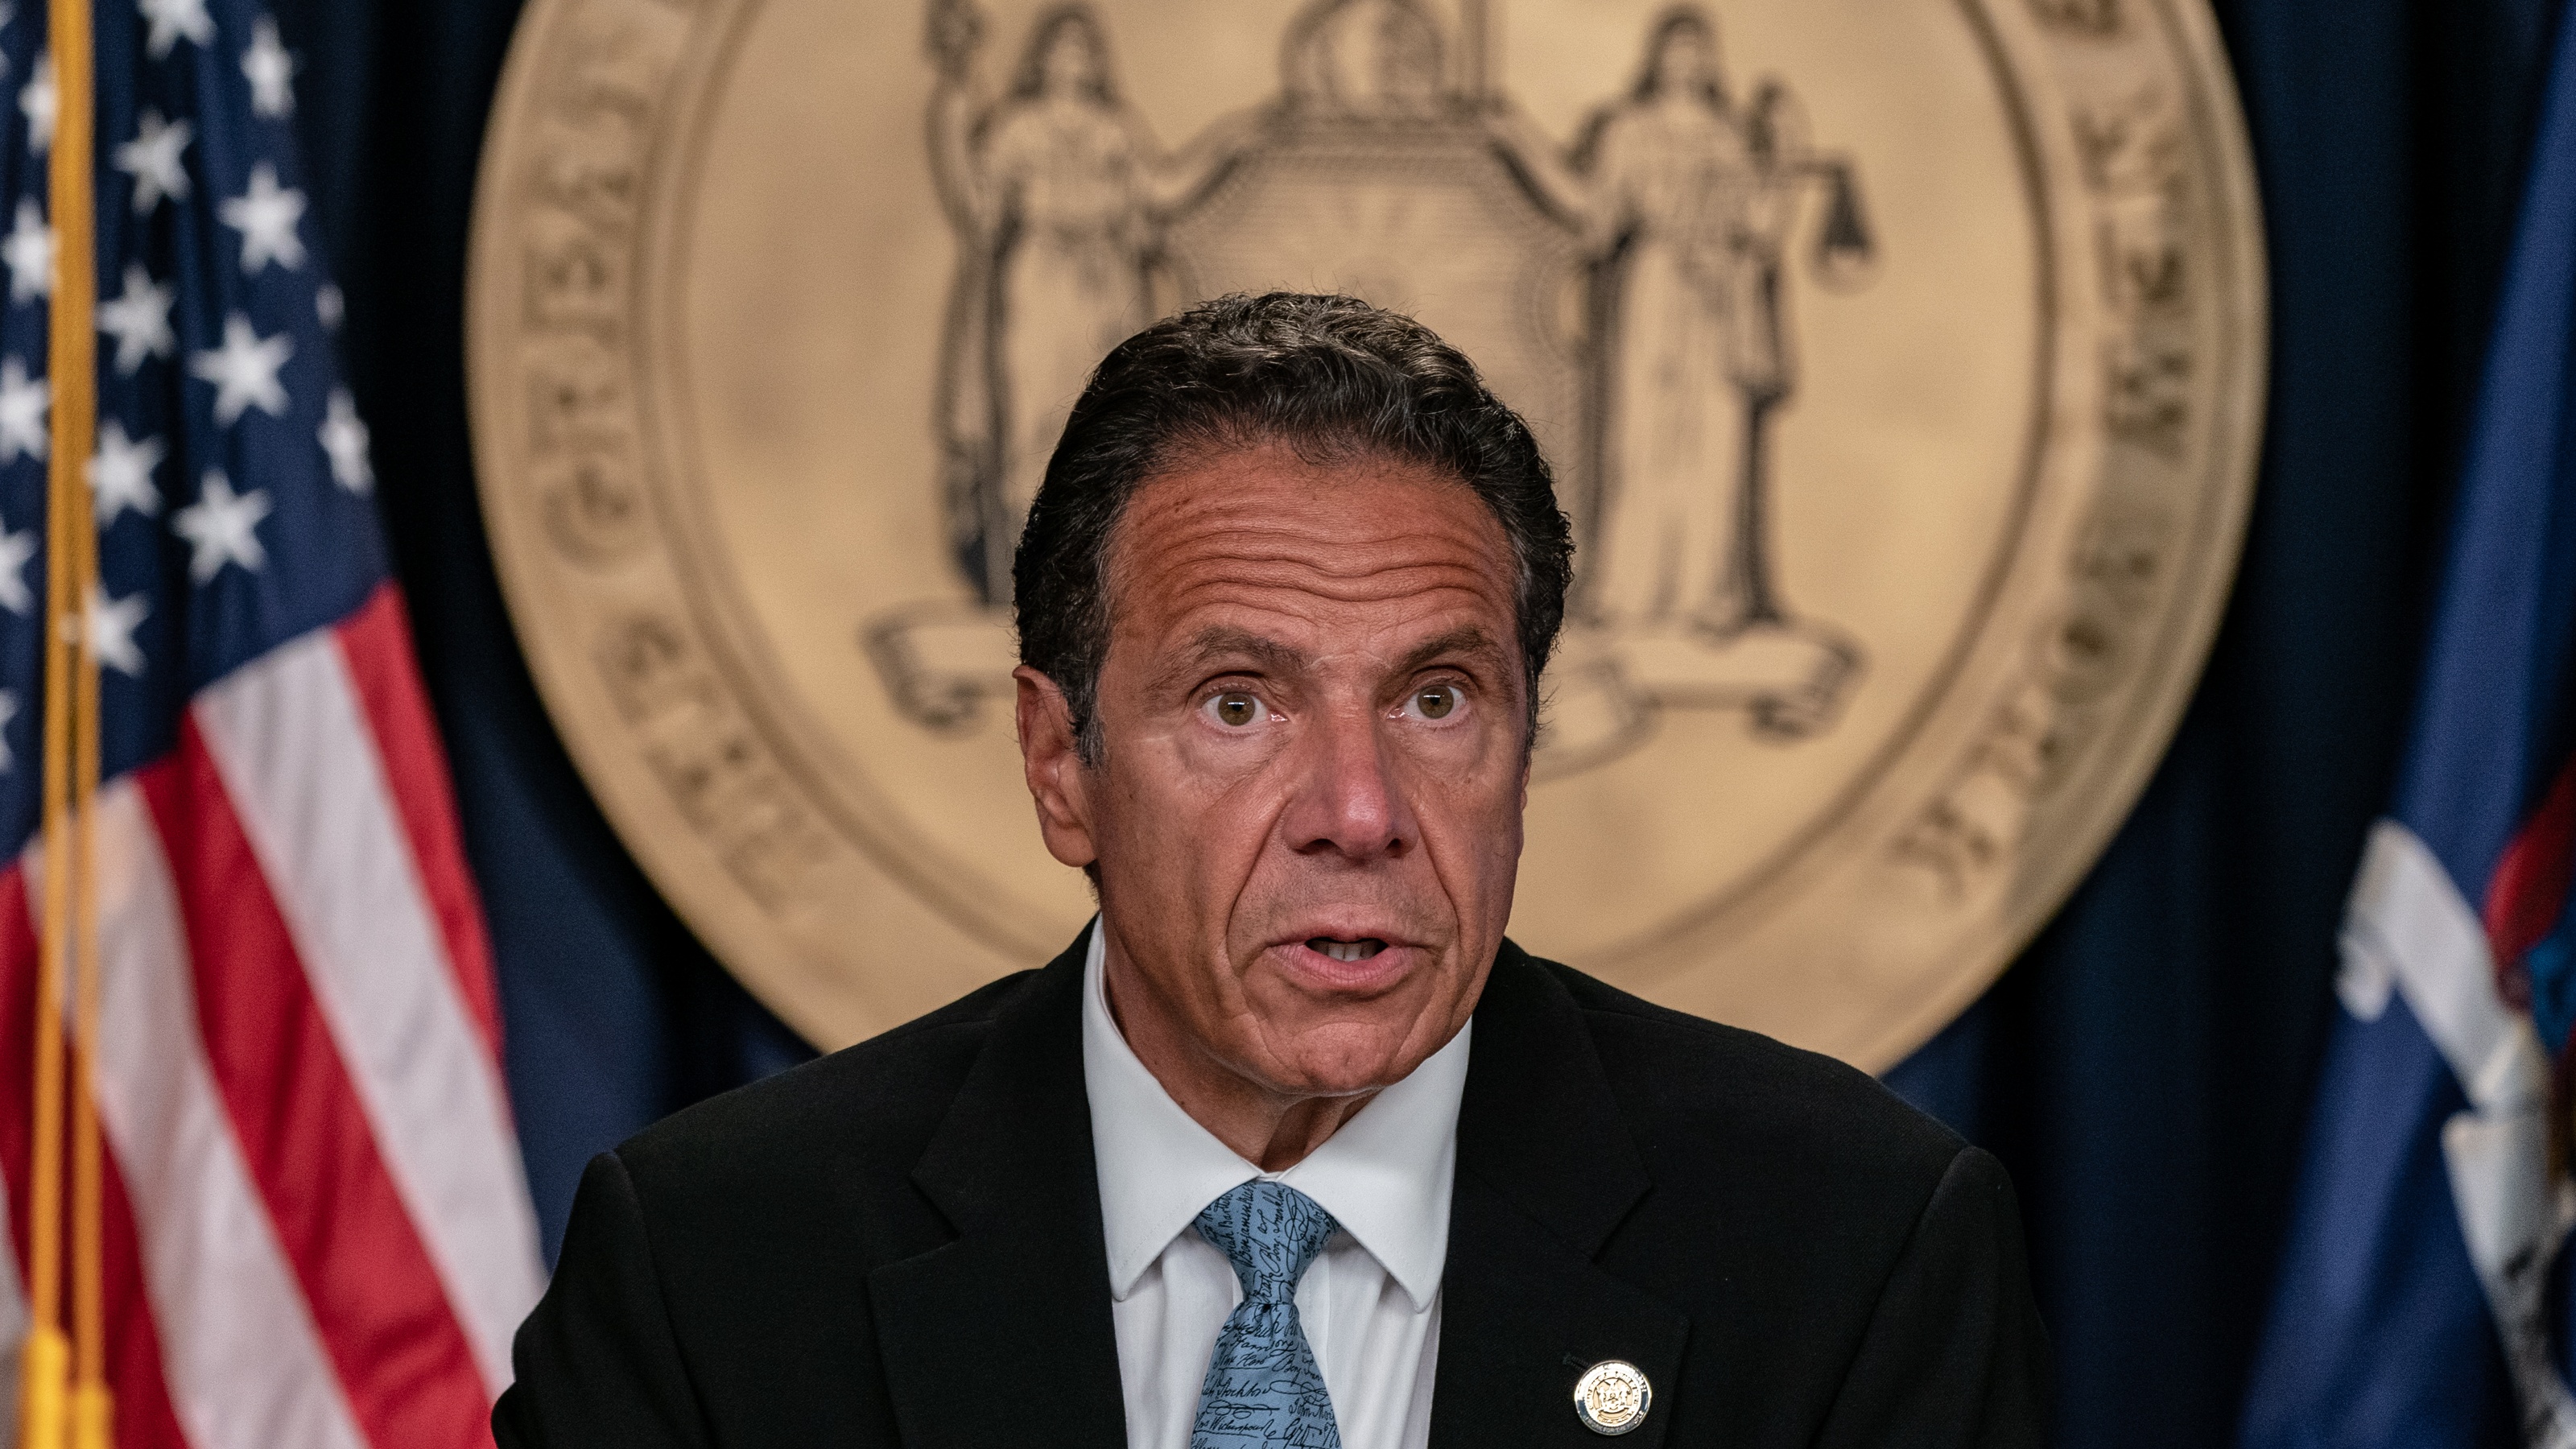 Andrew Cuomo during one of his daily Covid press briefings